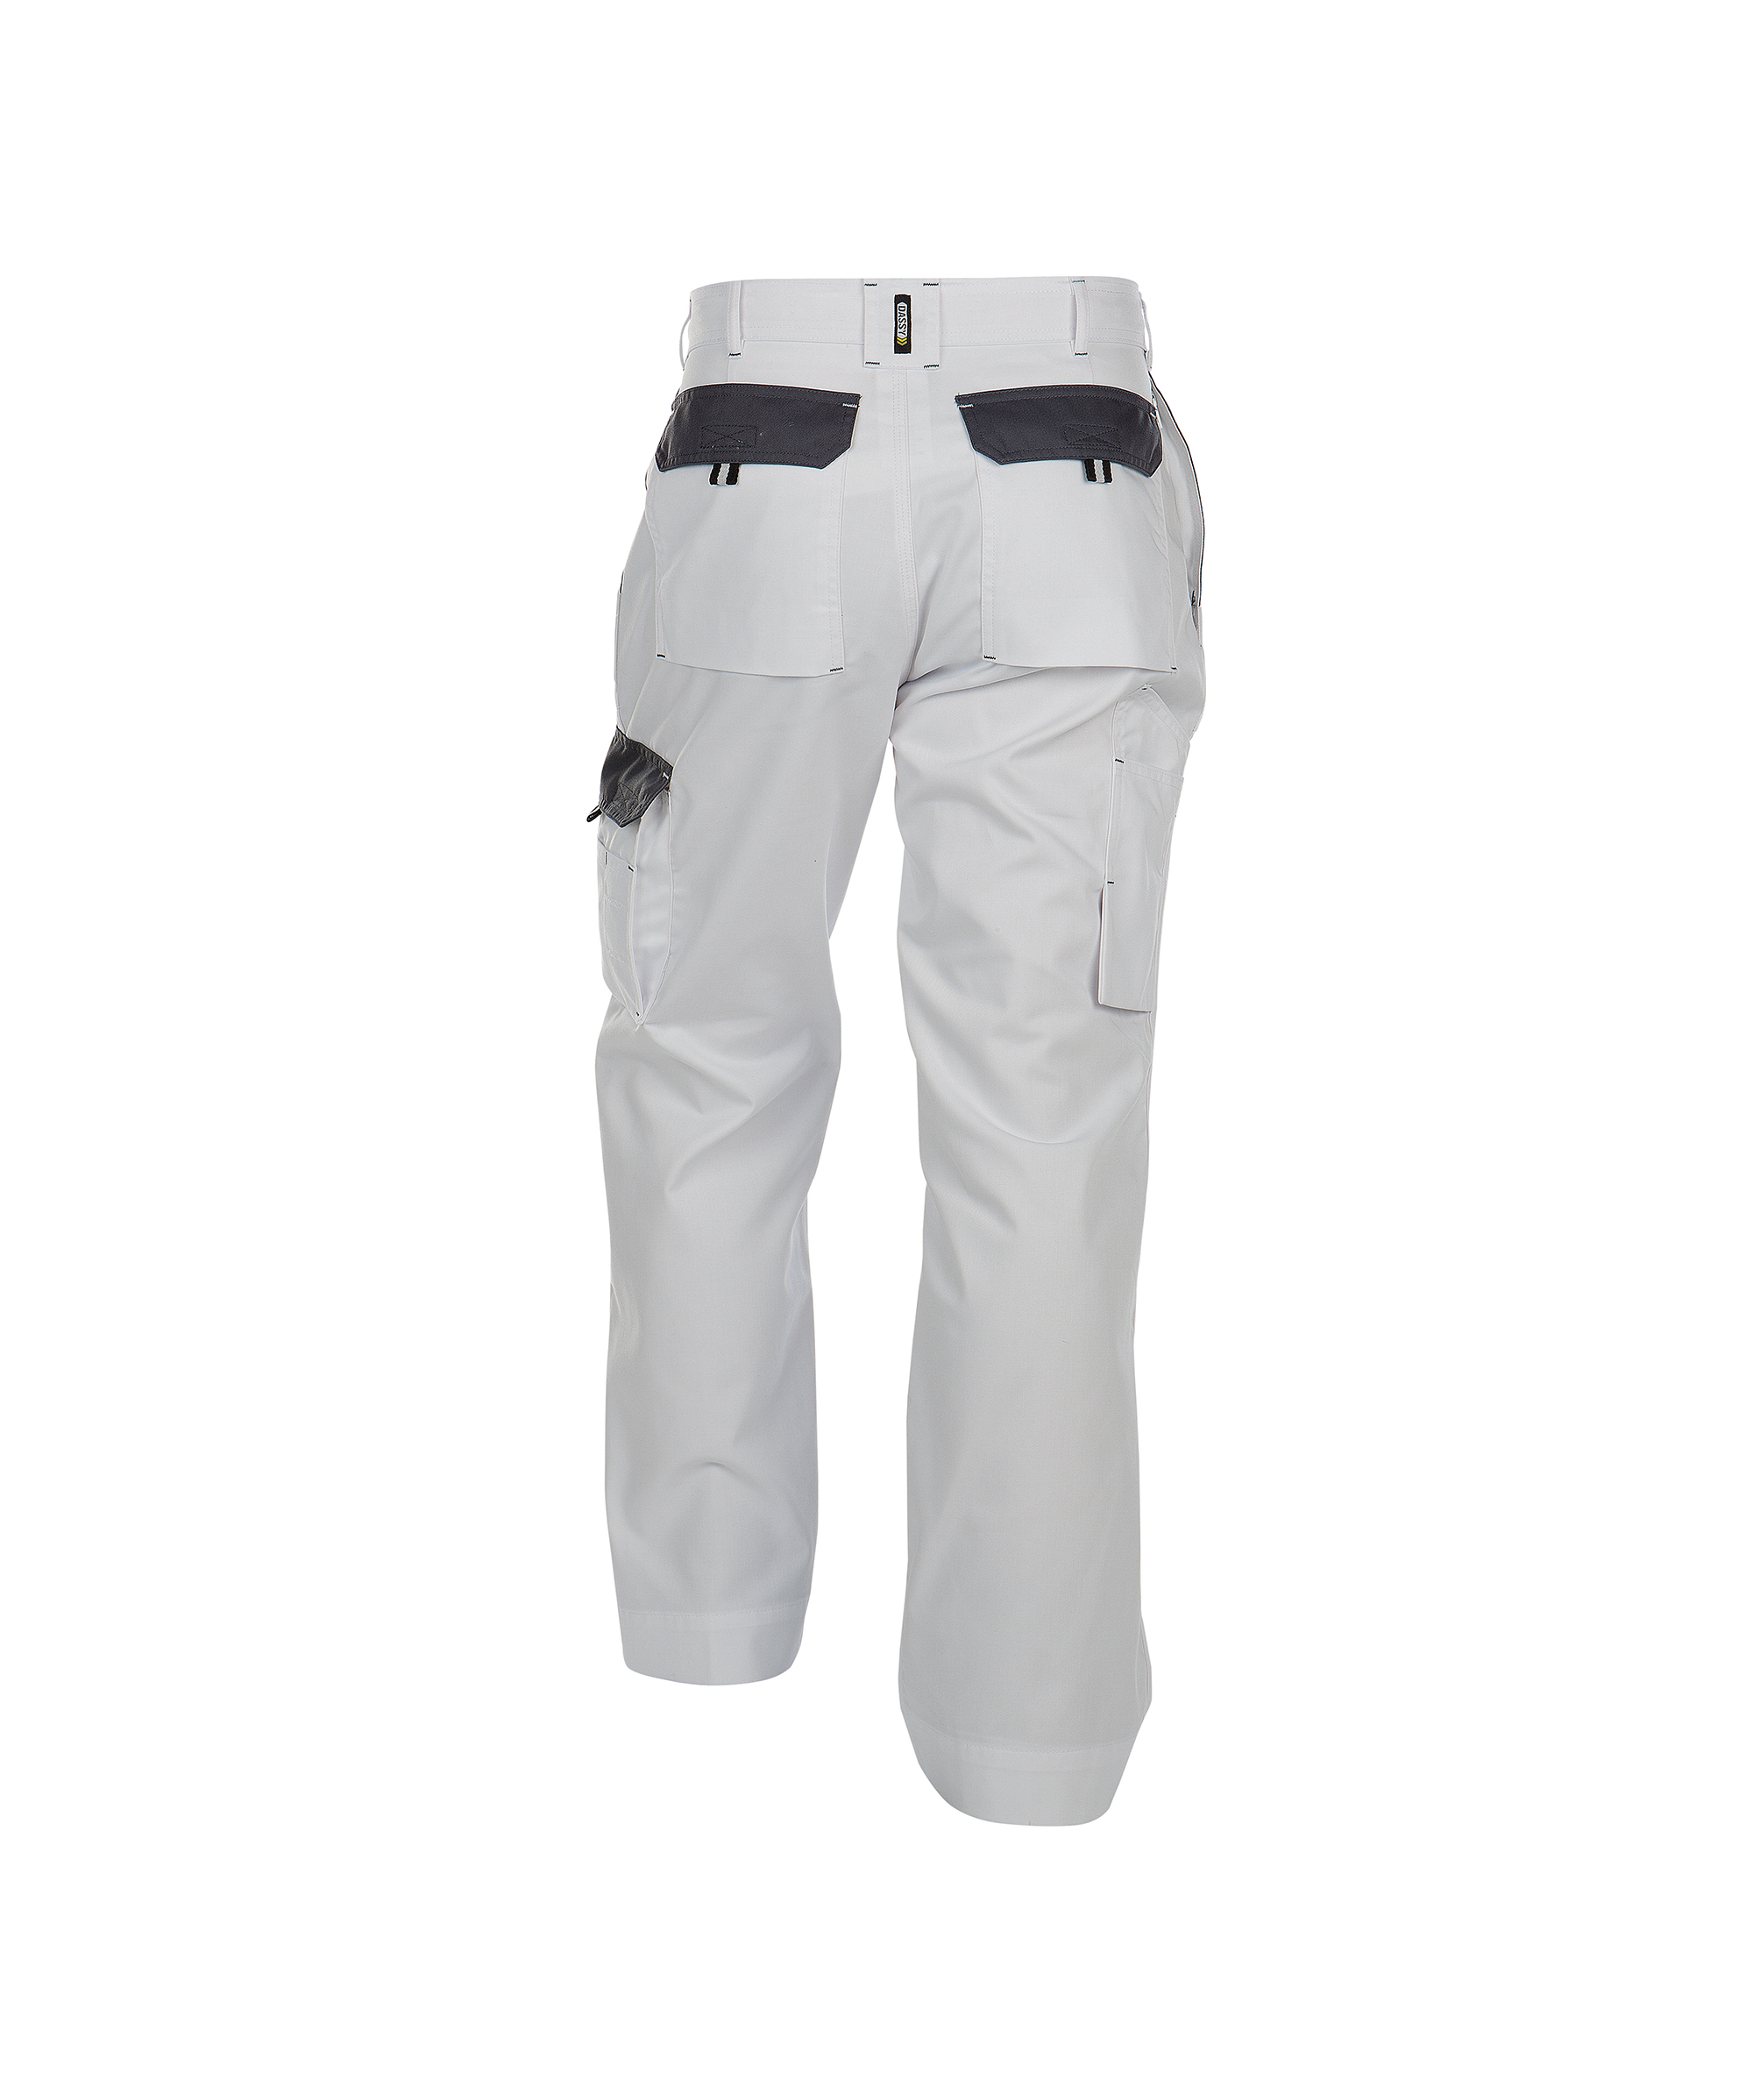 nashville_two-tone-work-trousers_white-cement-grey_back.jpg